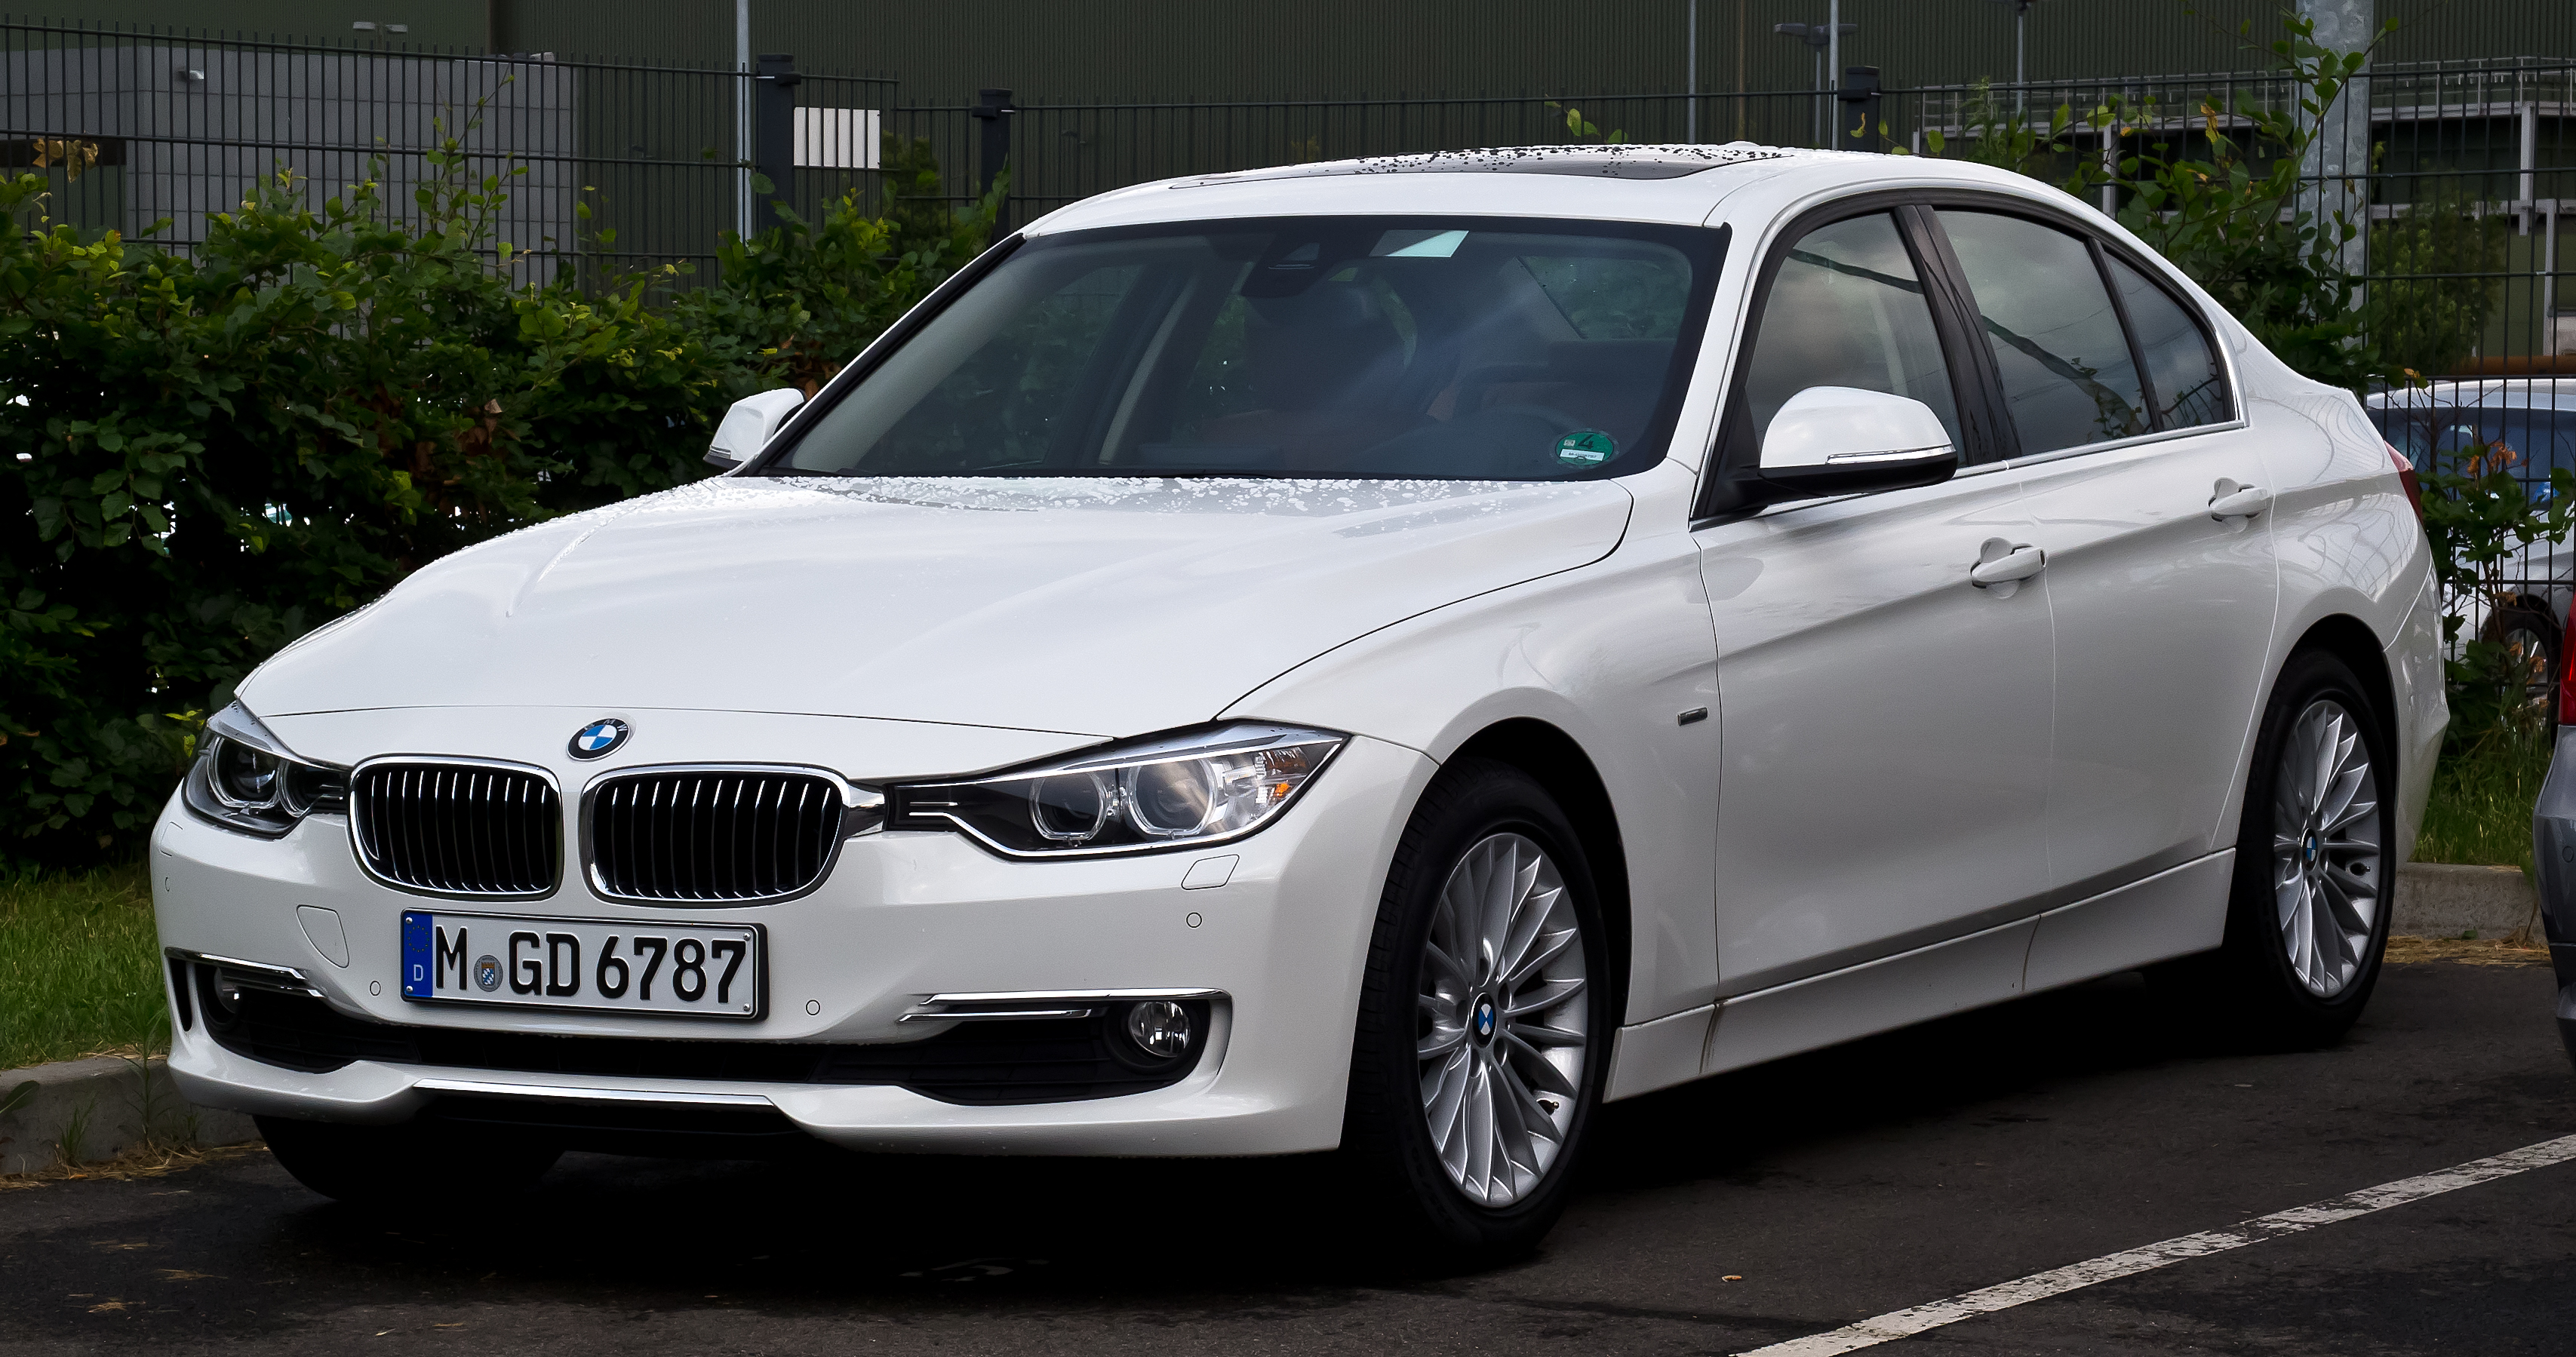 Bmw 318d price in india #7